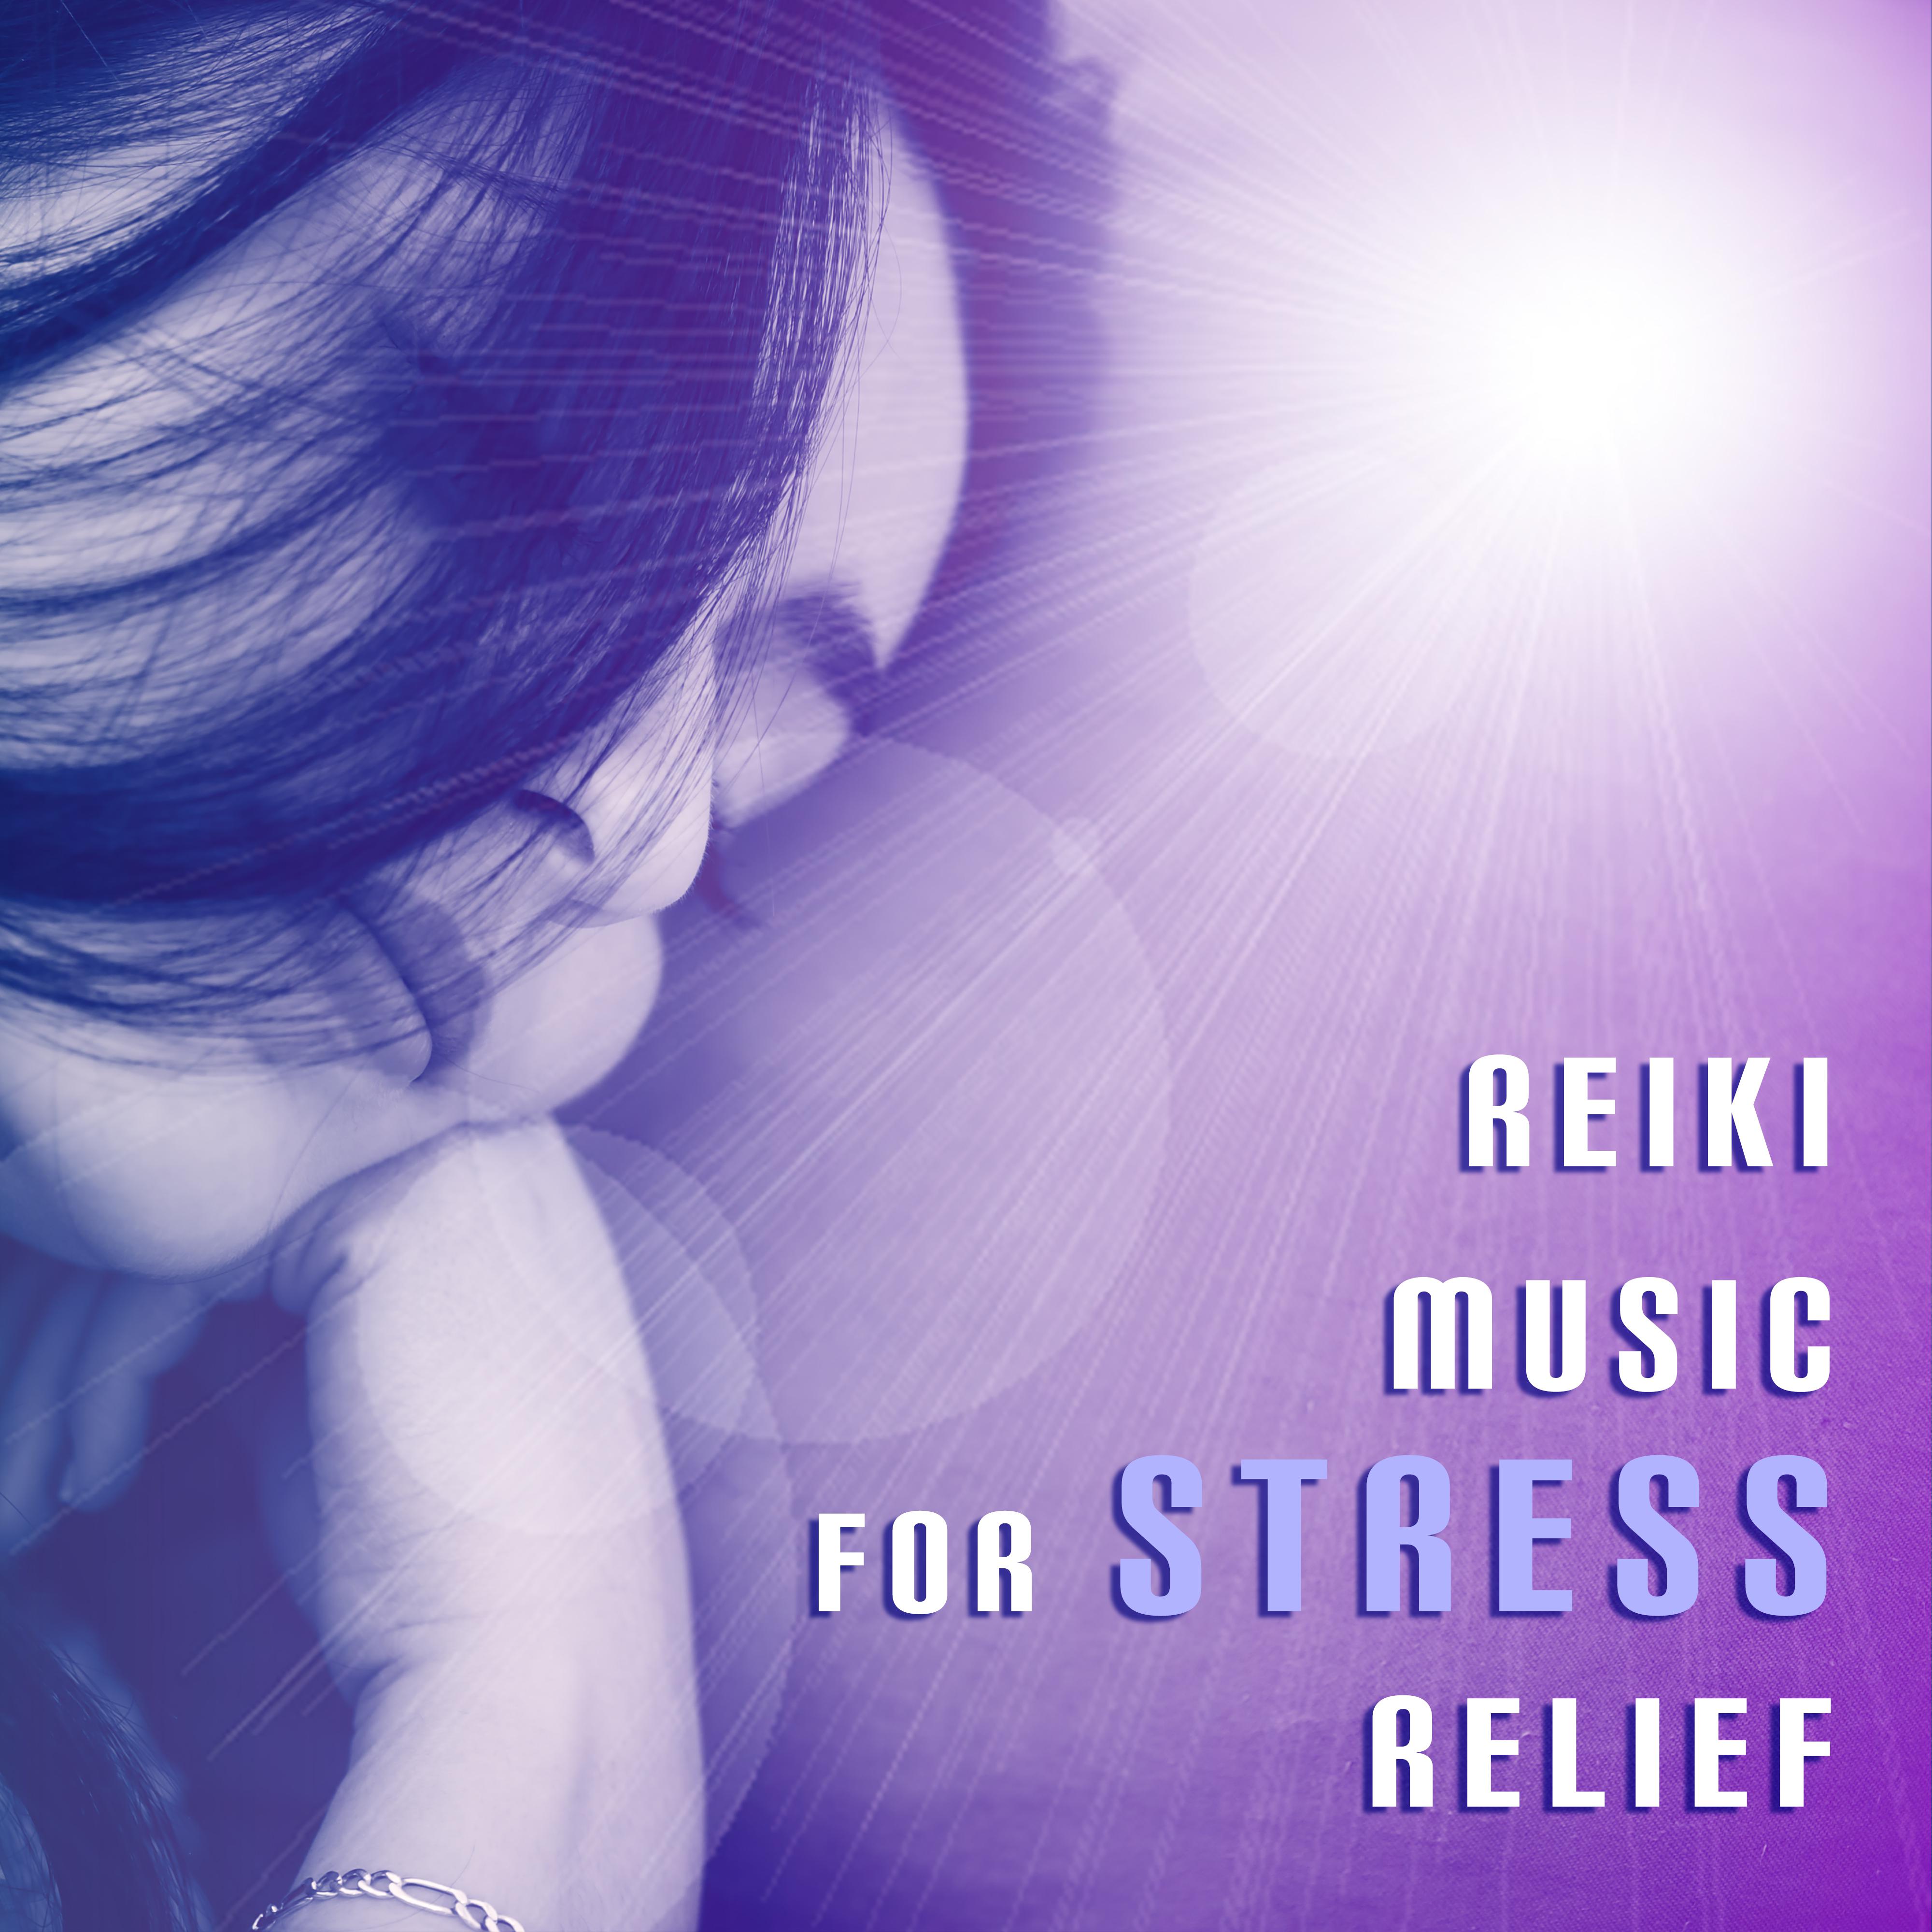 Reiki Music for Stress Relief – Relaxing Music for Sleep, Healing Sounds, Soft Lullabies, Pure Relaxation, Harmony